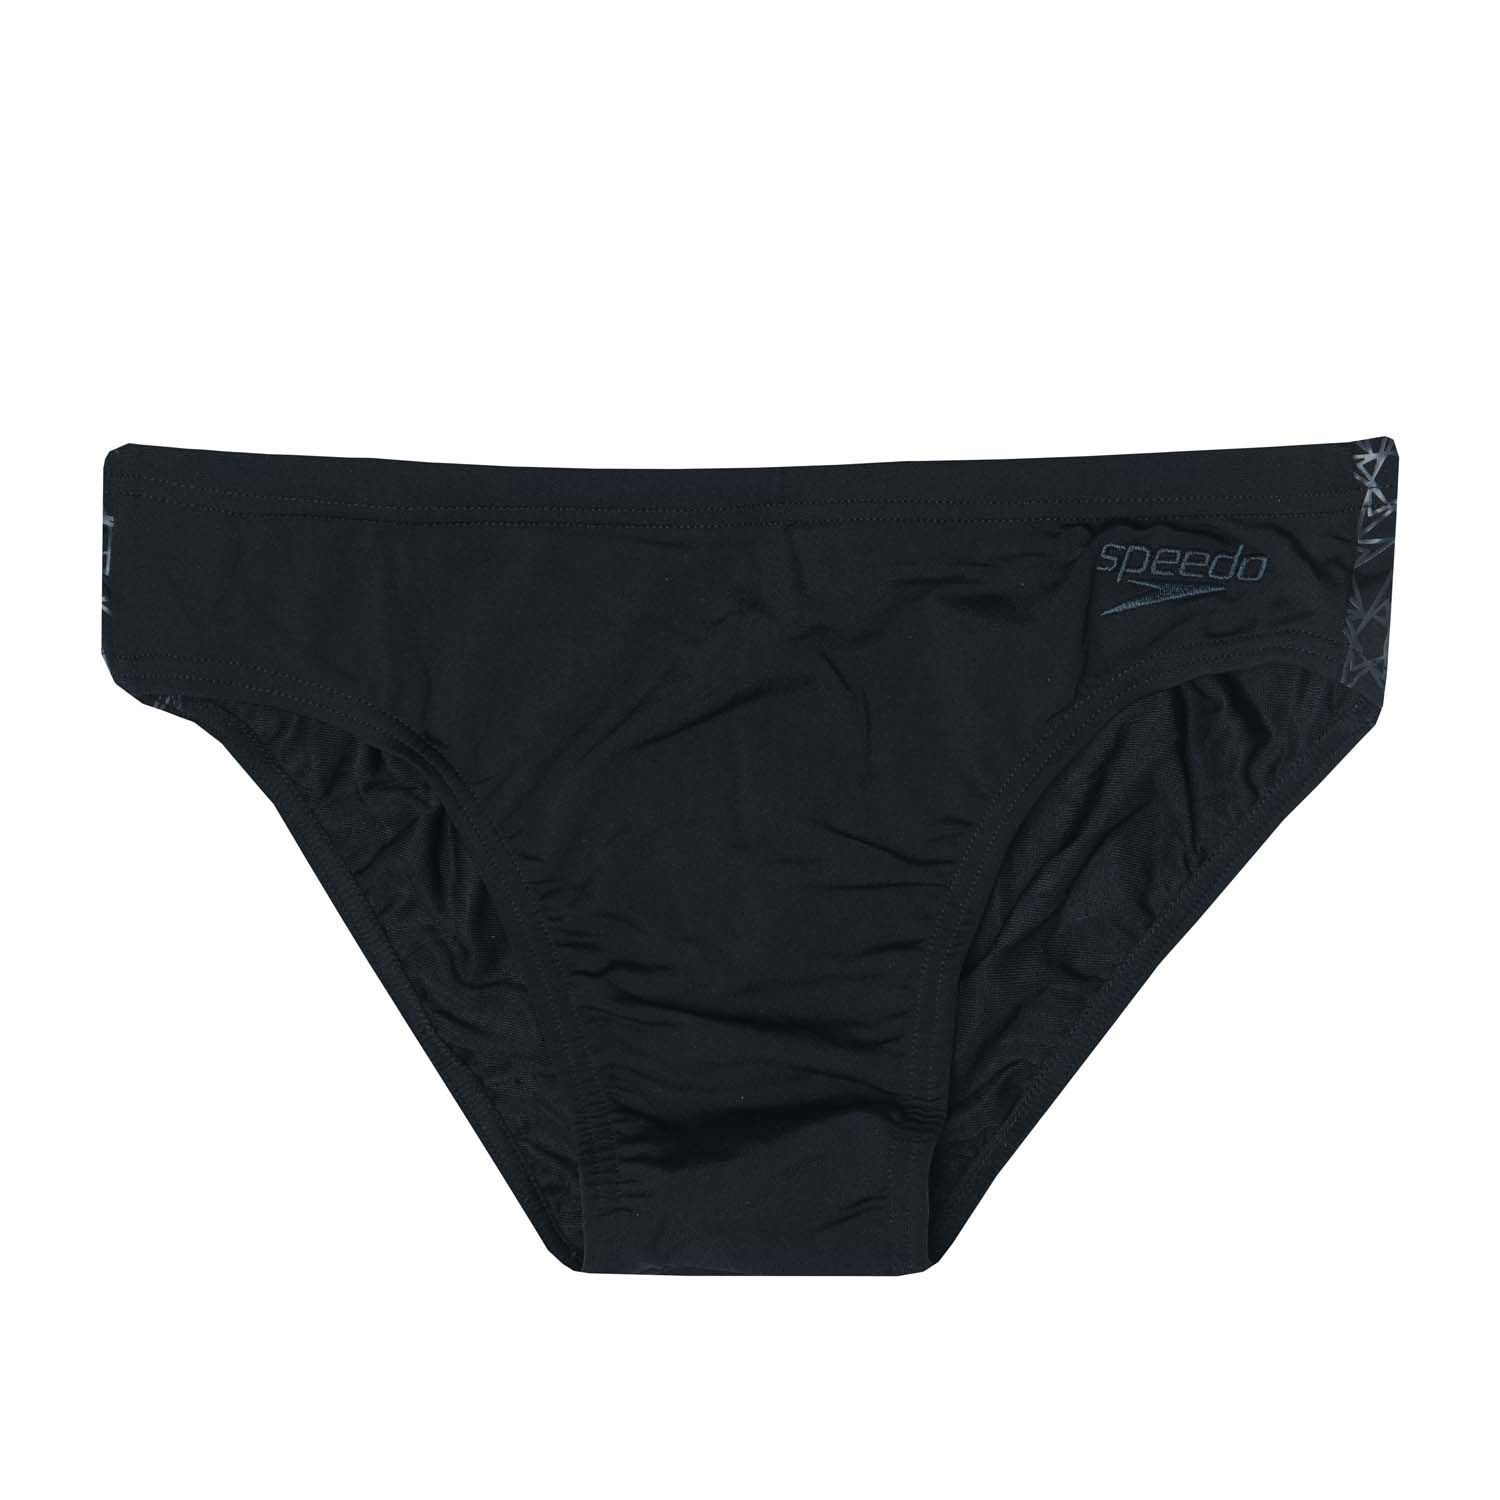 Mens Speedo Boomstar Splice 7cm Swim Brief in black grey.- Drawstring waist.- Quick dry - Dries faster after your swim workout.- 100% chlorine resistant  Endurance+ fabric.- New Boomstar print in tones.- Iconic Speedo branding.- Body: 53% Polyester  47% PBT Polyester. Lining: 100% Polyester.  Machine washable.- Ref: 8124209023